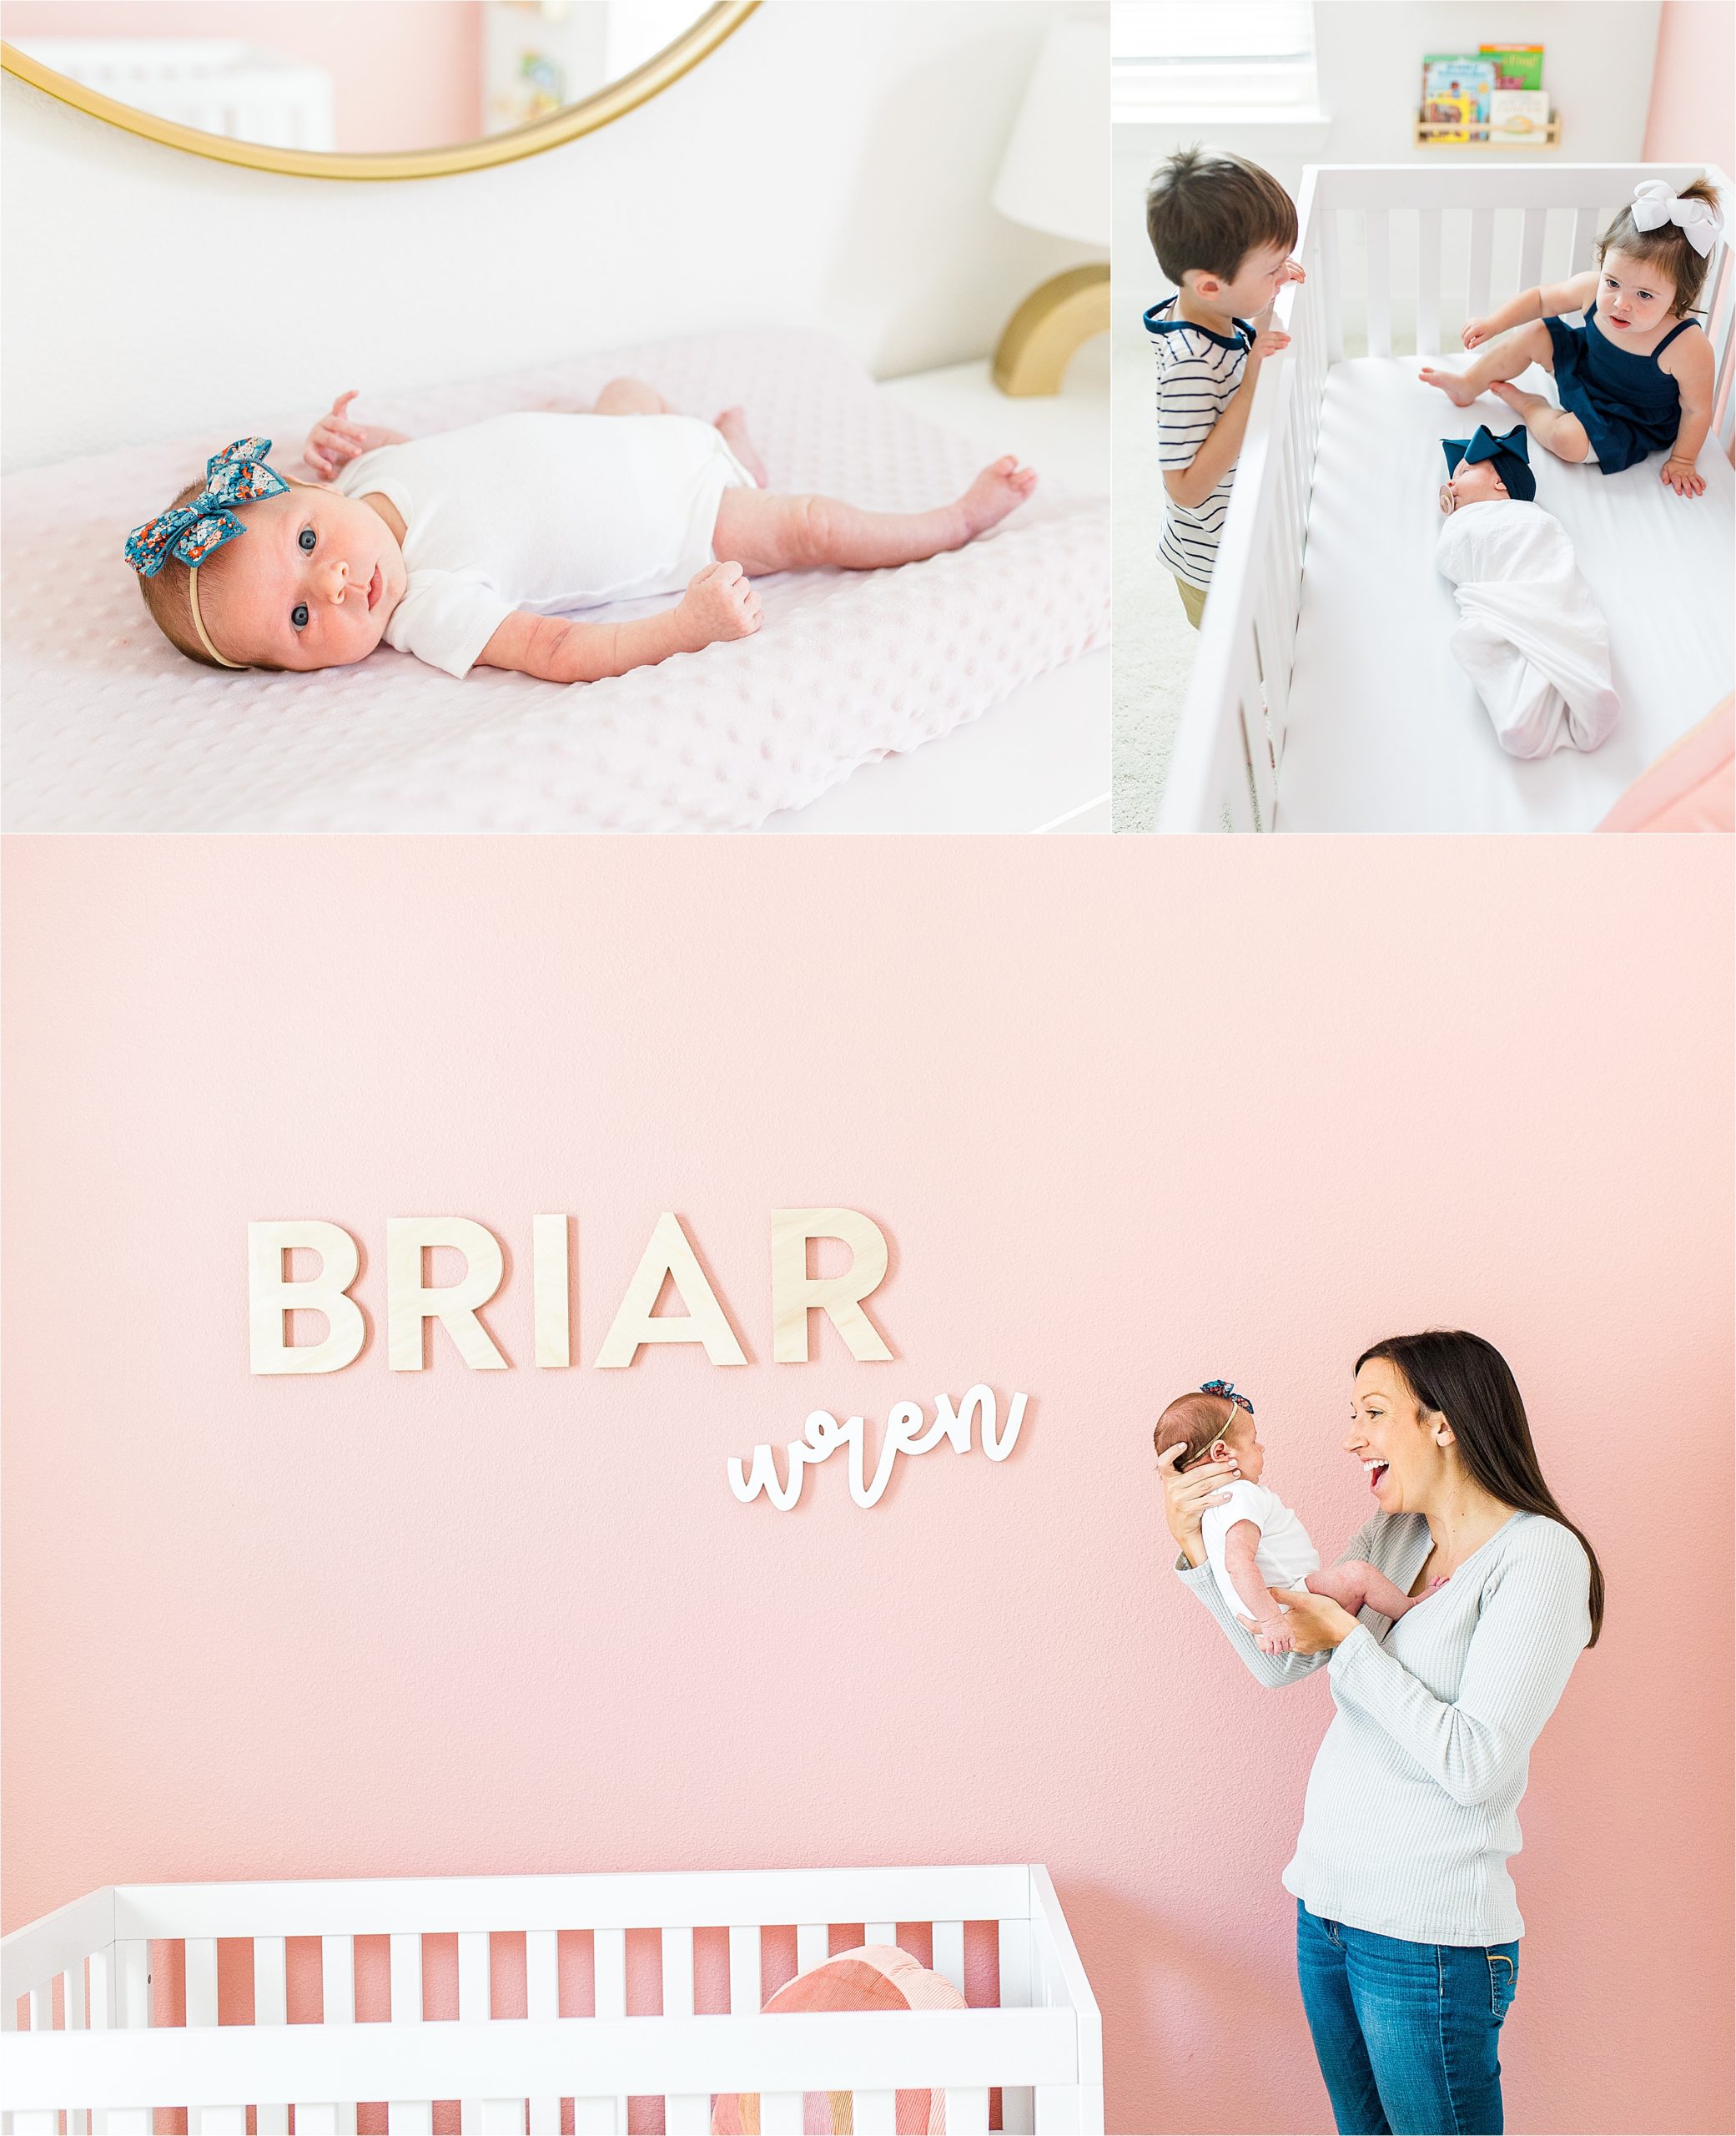 A newborn baby girl looks at the camera and her mom embraces her in front of her name on the wall which says, "Briar", during their San Antonio lifestyle newborn photos 